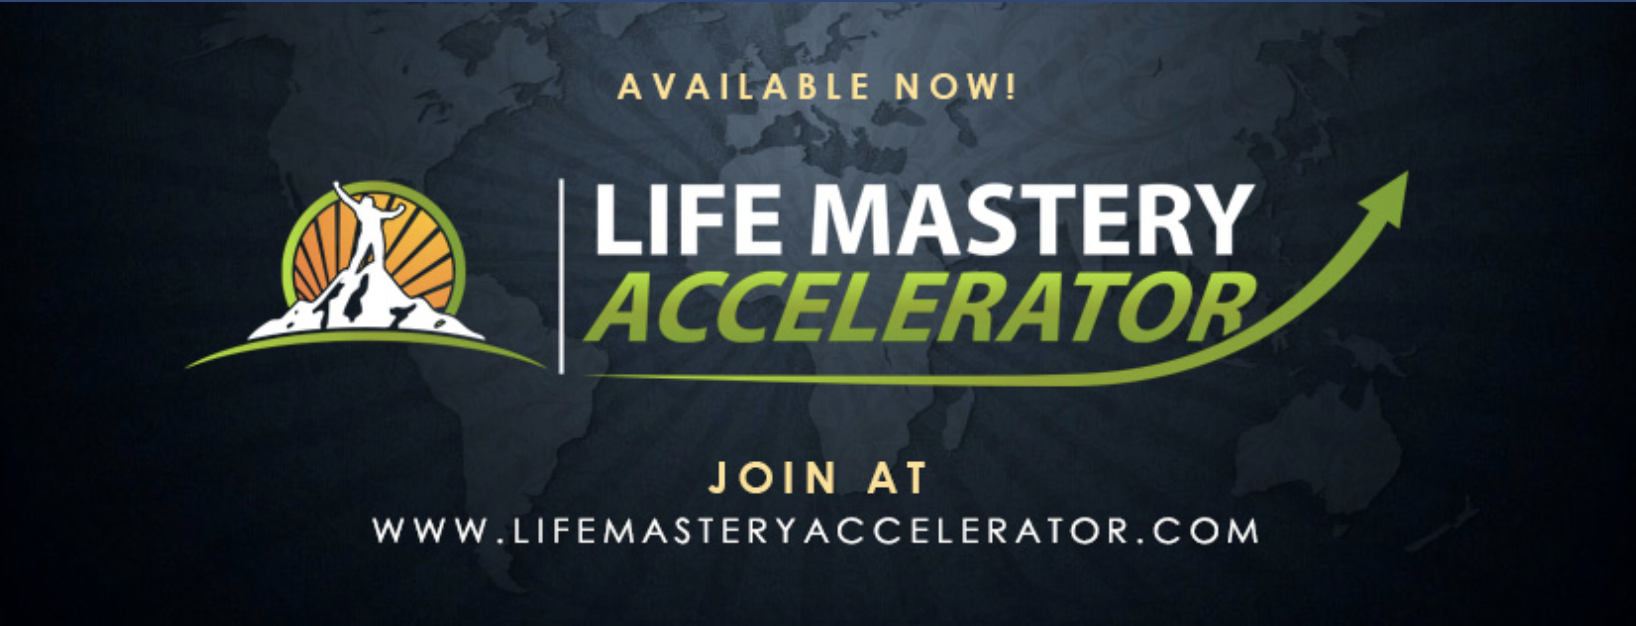 Project Life Mastery Facebook Page Image